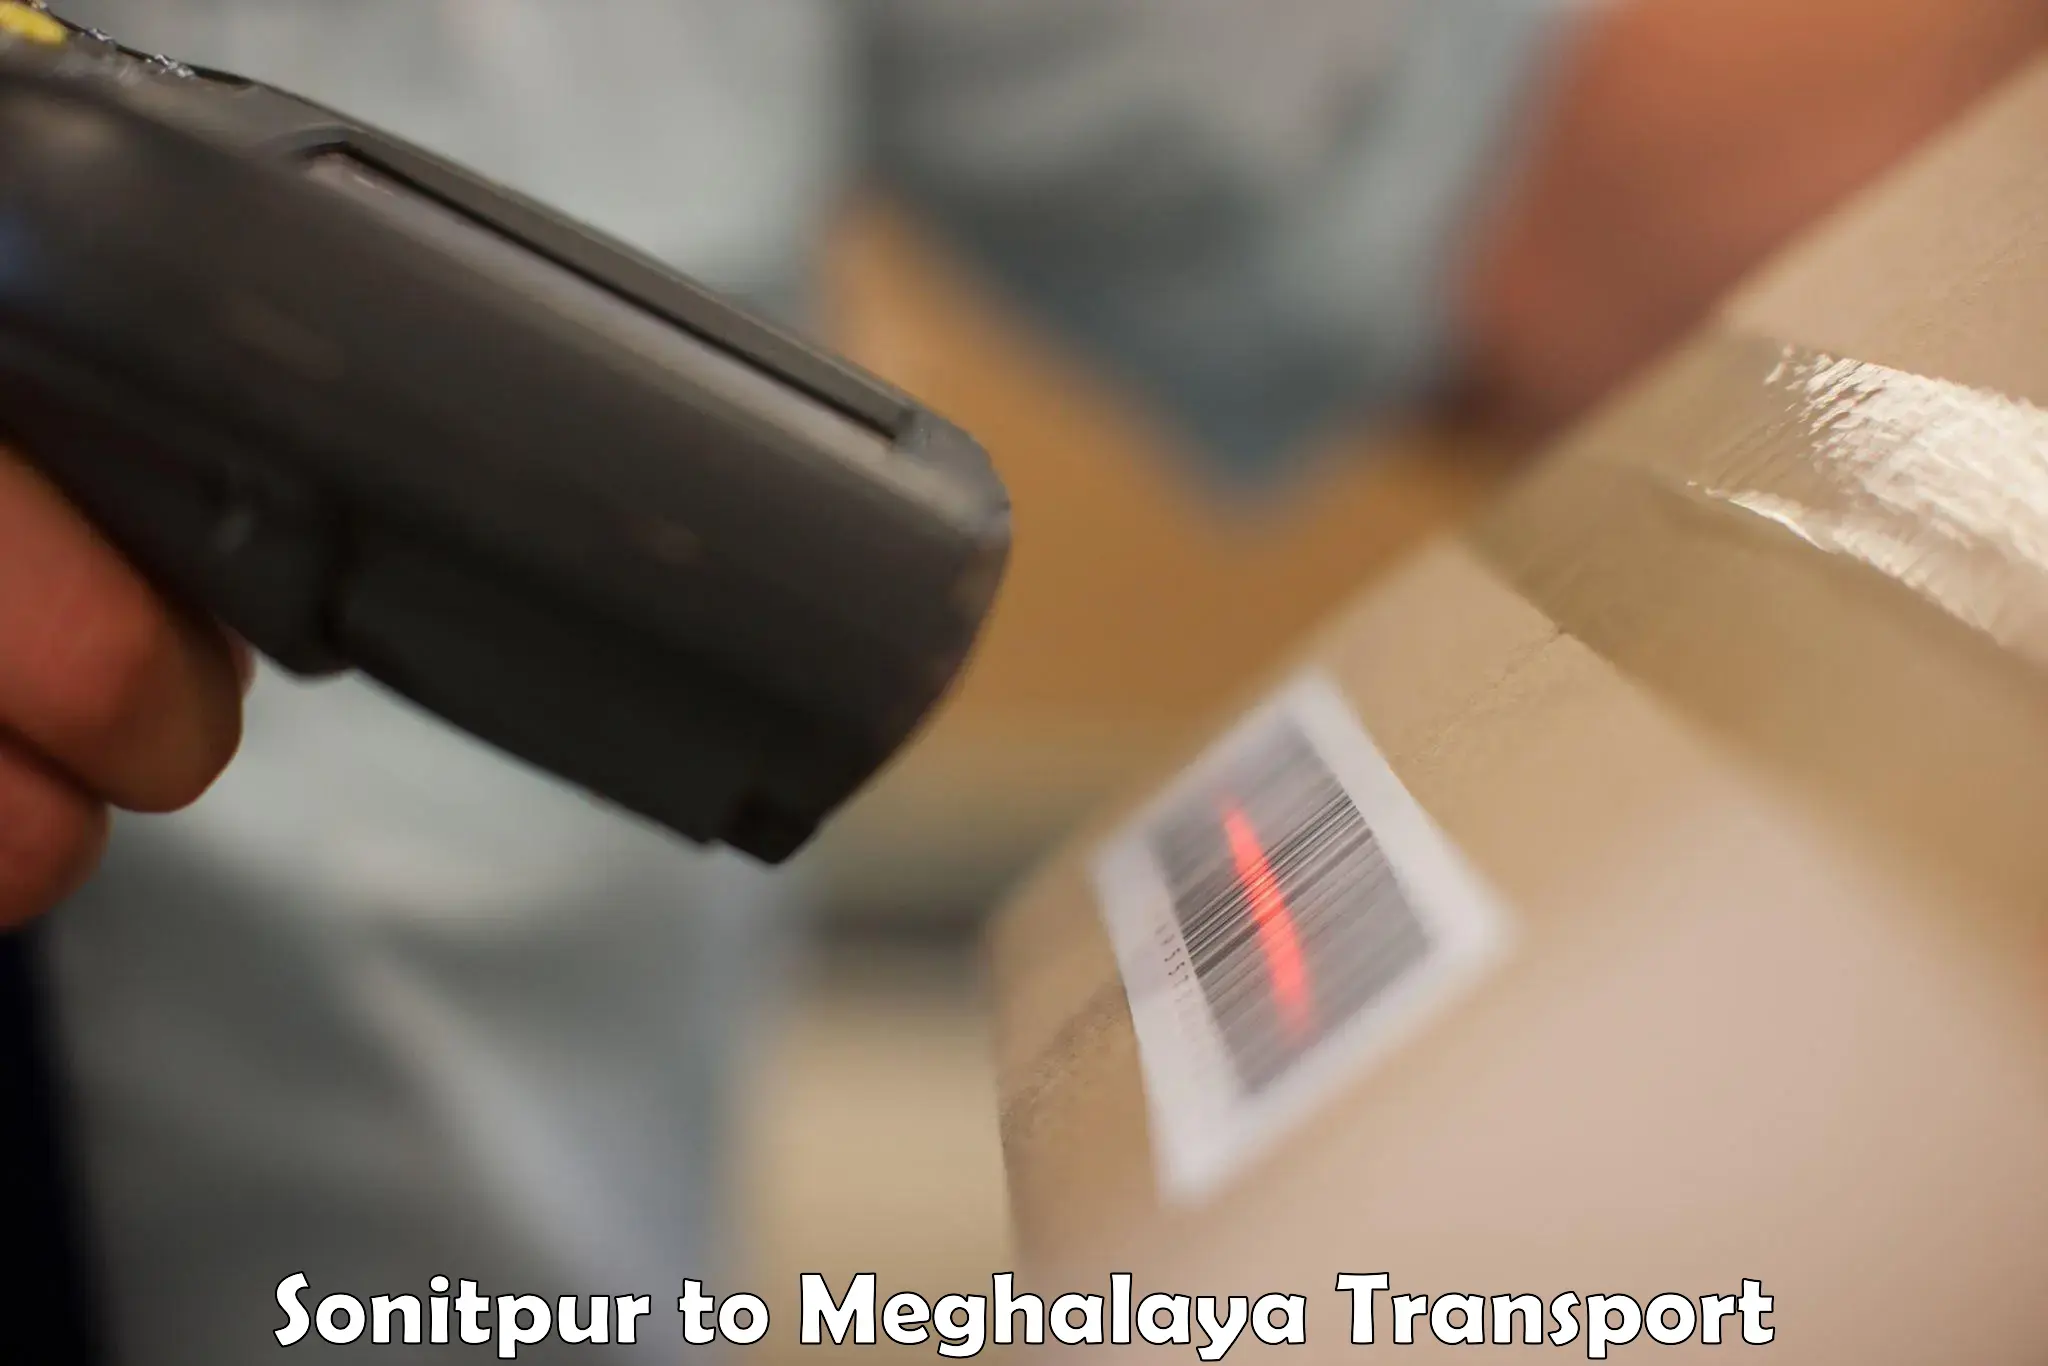 Container transport service Sonitpur to Meghalaya